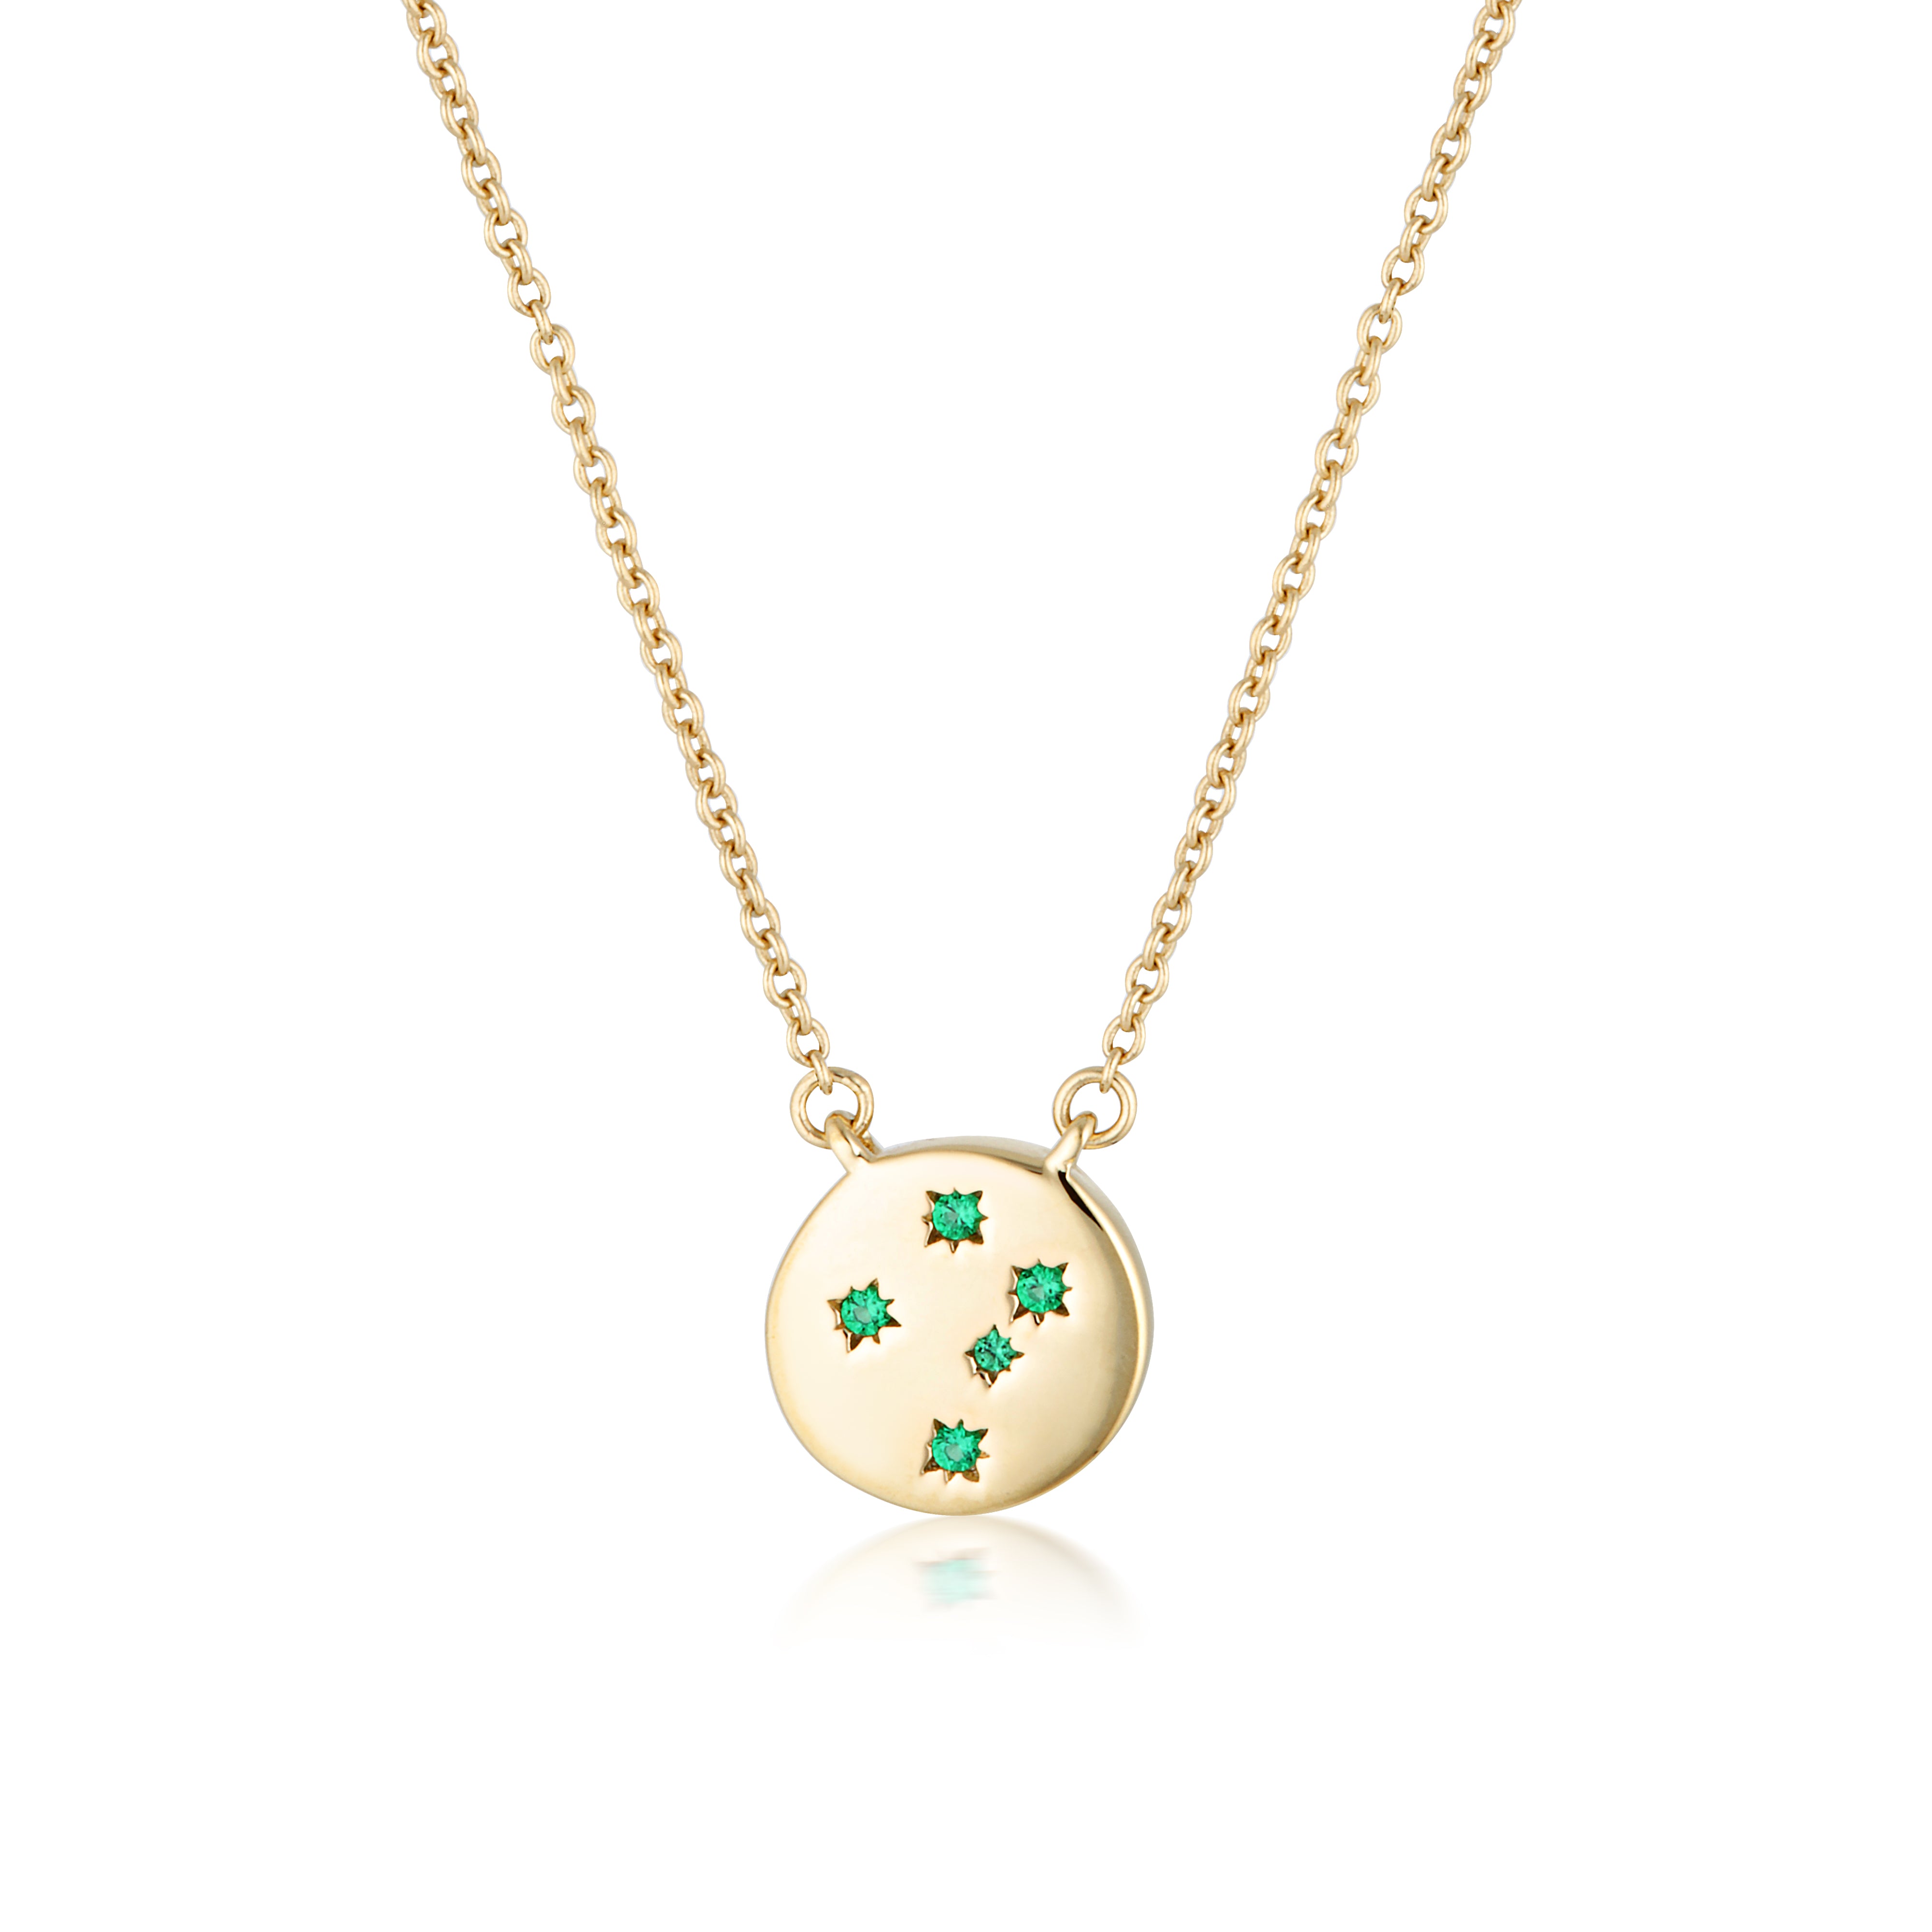 SOUTHERN CROSS NECKLACE GOLD